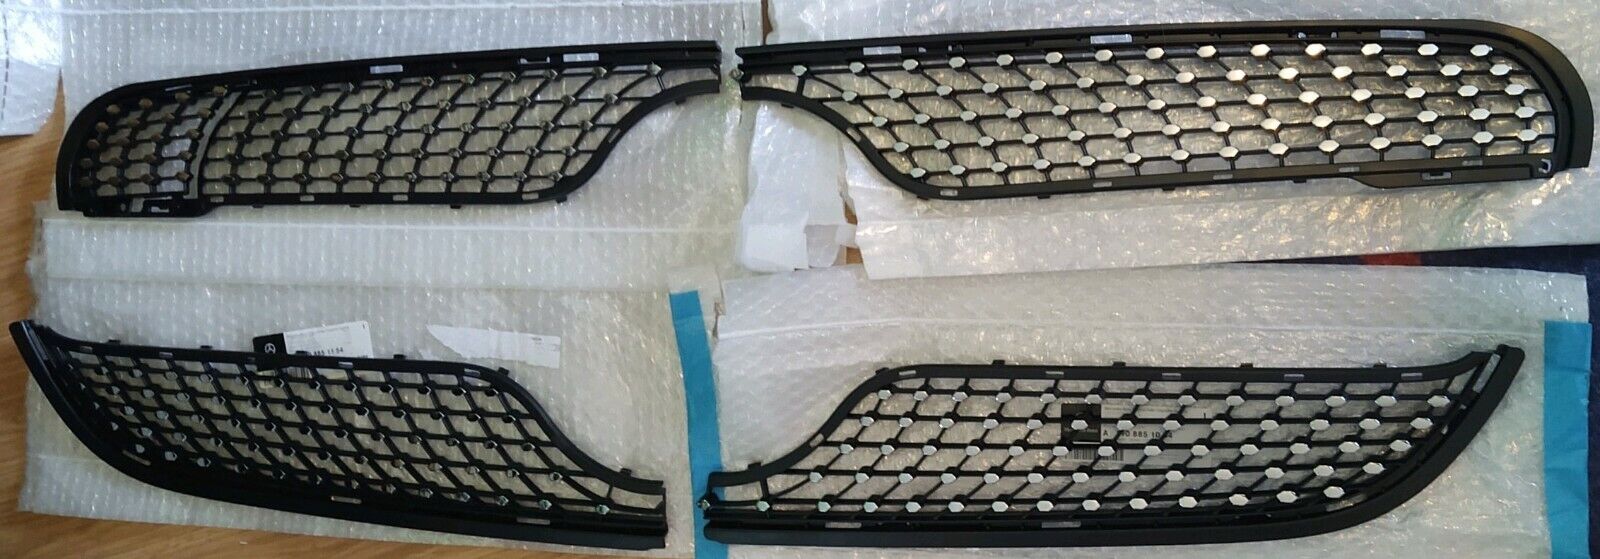 Mercedes-Benz OEM C190 AMG GT AMG Galvanics Package 2016-17 Front Grille Inserts